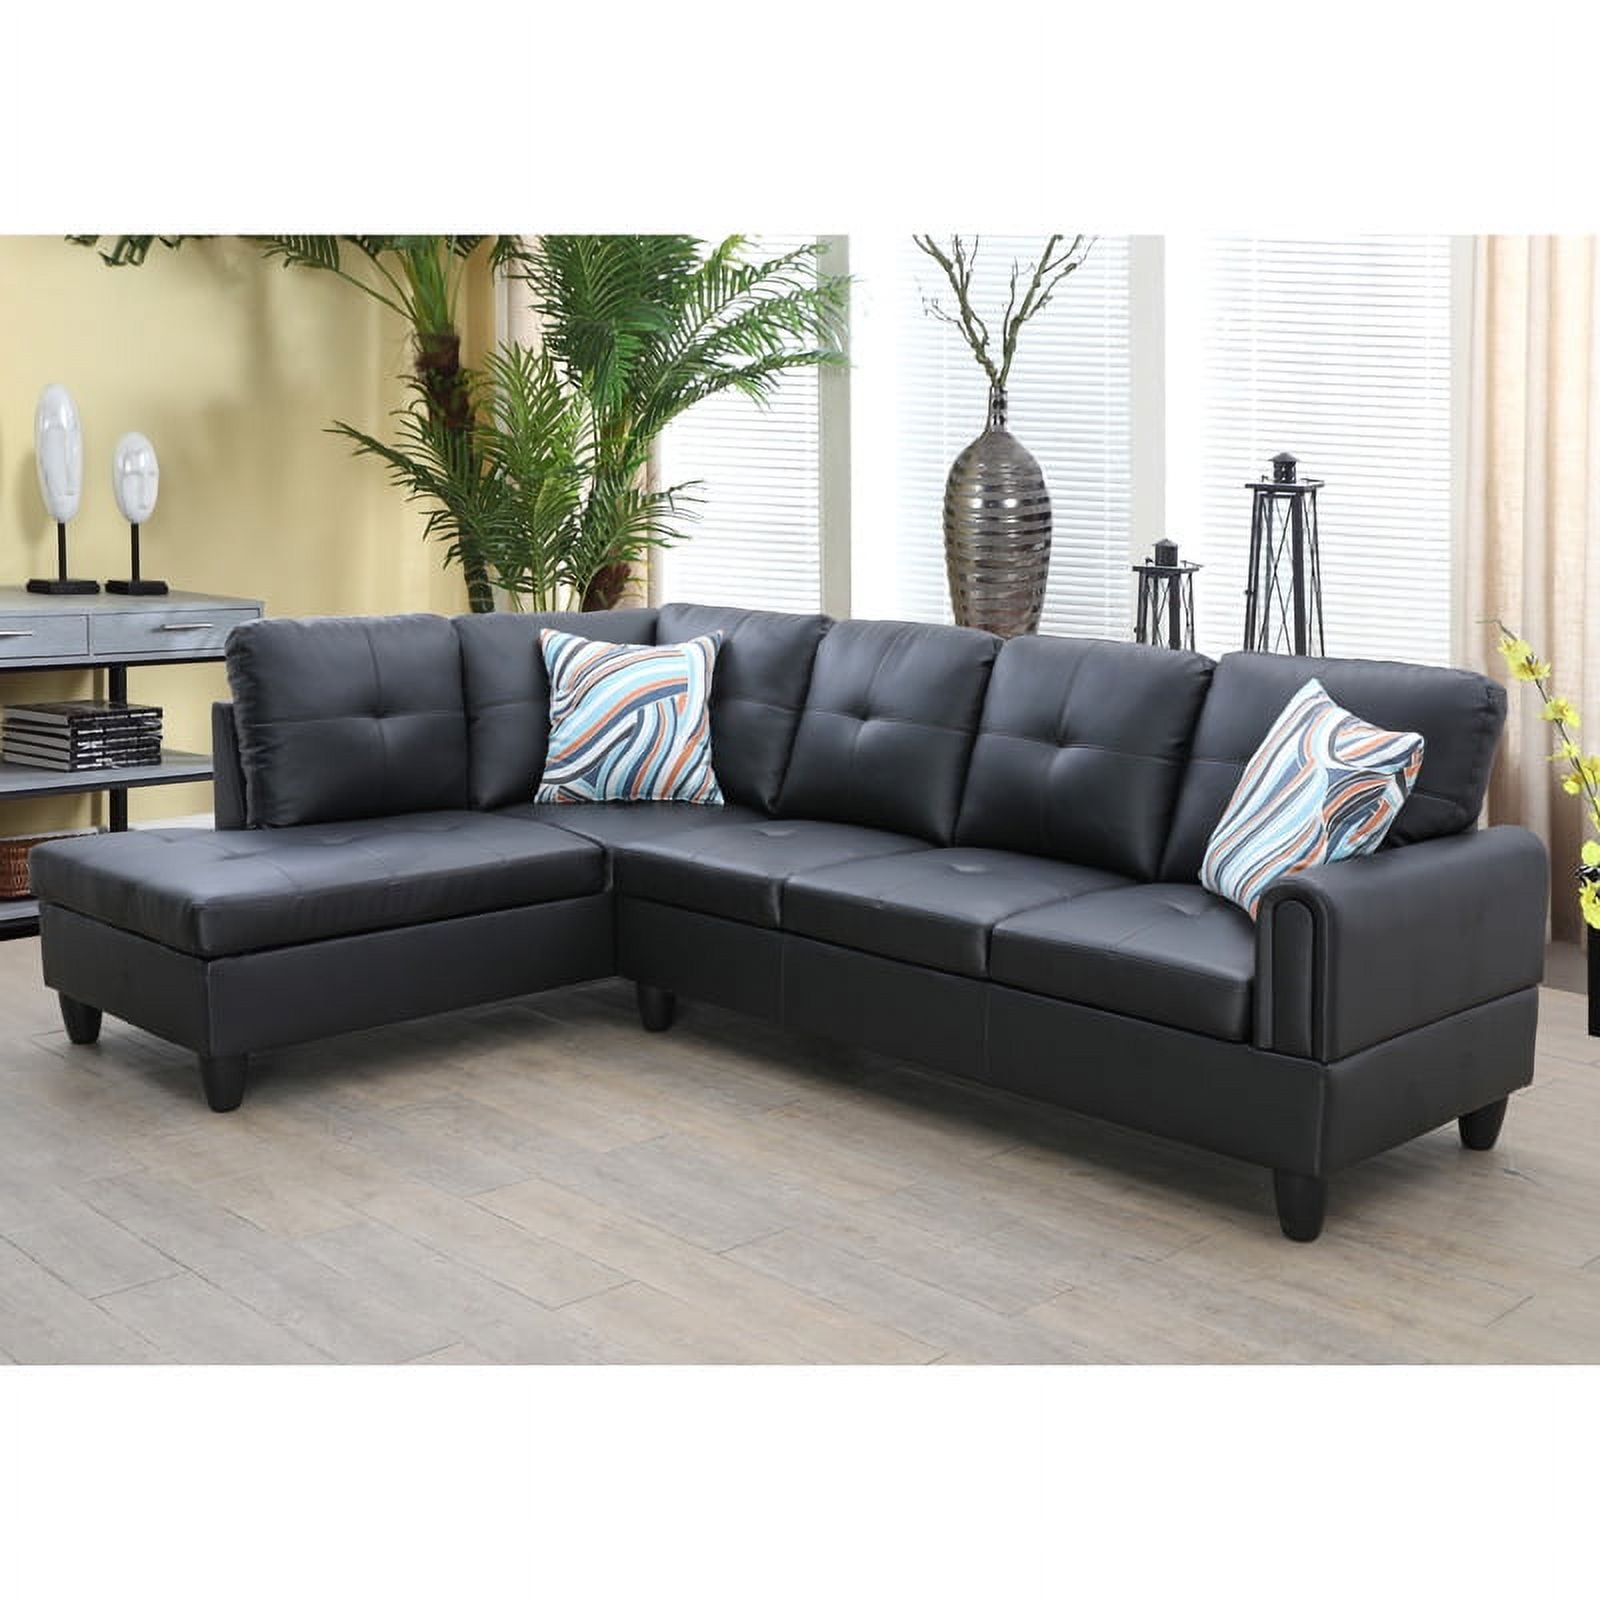 Hommoo Faux Leather 3 Piece Couch Living Room Sofa Set, L Shaped Couch For  Small Space, Black(Without Ottoman) – Walmart With 3 Piece Leather Sectional Sofa Sets (Photo 8 of 15)